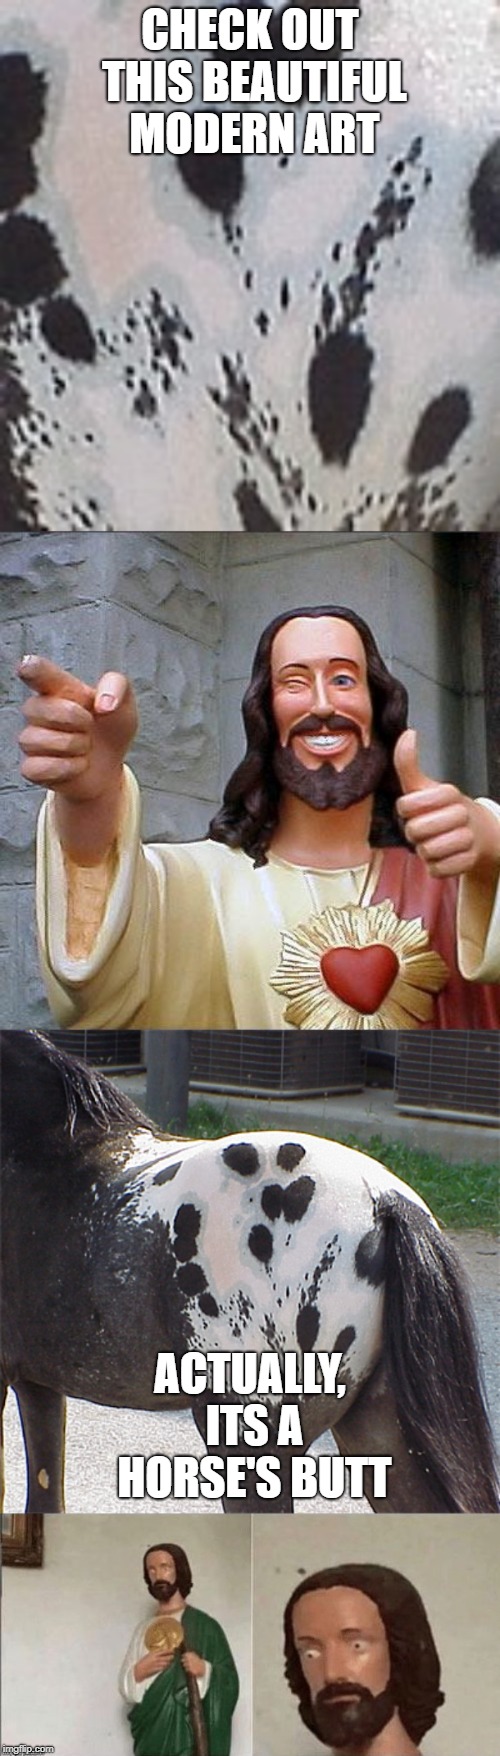 Did it fool ya? | CHECK OUT THIS BEAUTIFUL MODERN ART; ACTUALLY, ITS A HORSE'S BUTT | image tagged in memes,buddy christ,butt,horse,funny,modern art | made w/ Imgflip meme maker